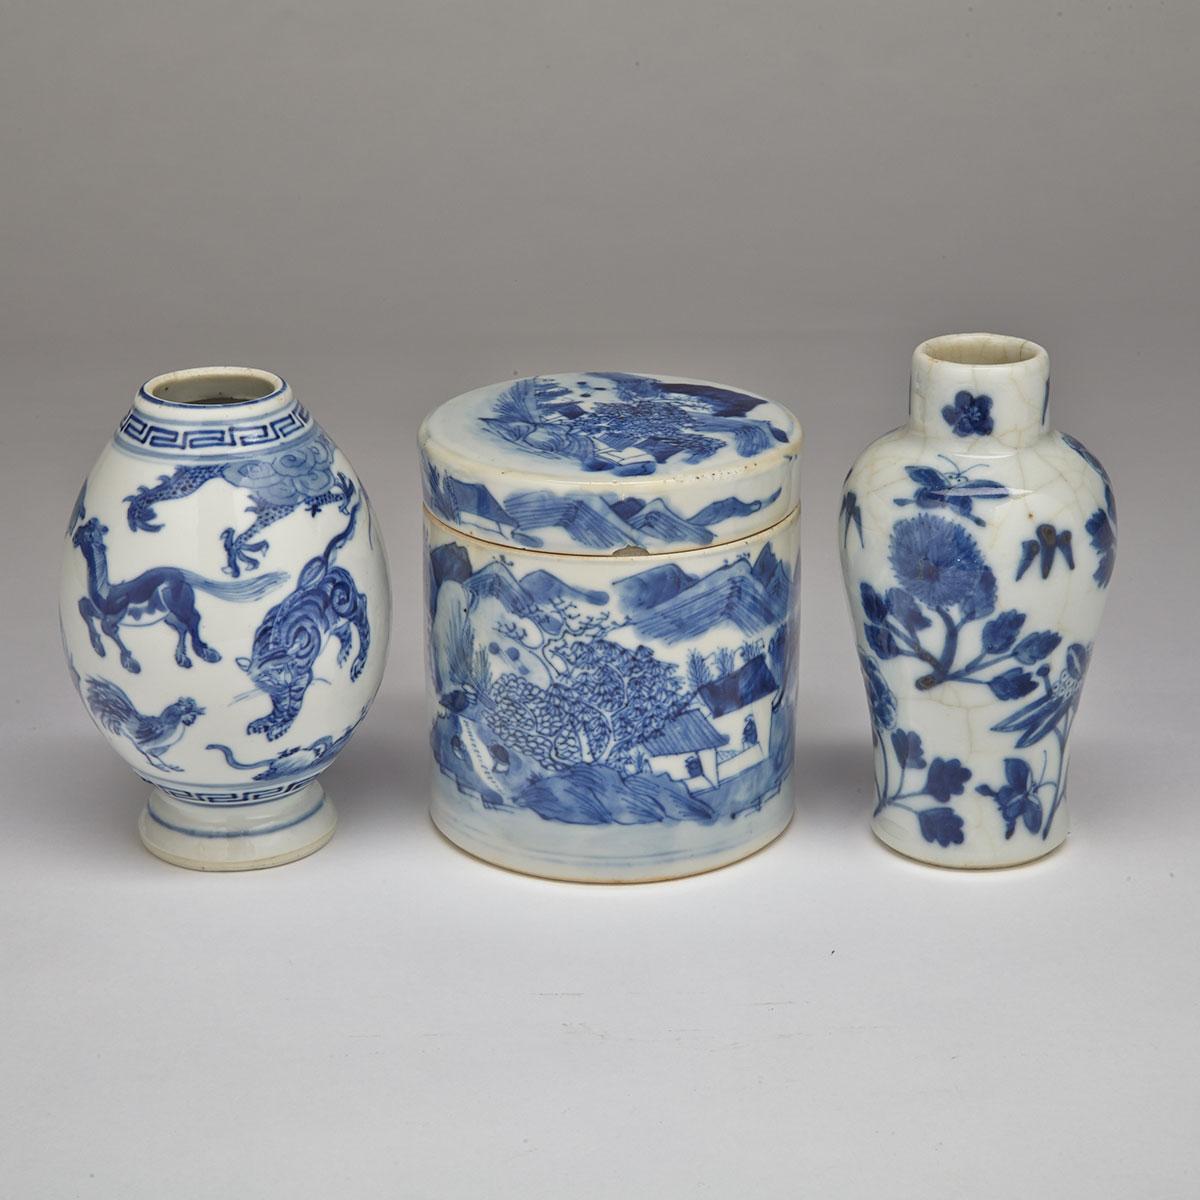 Three Blue and White Porcelain Wares